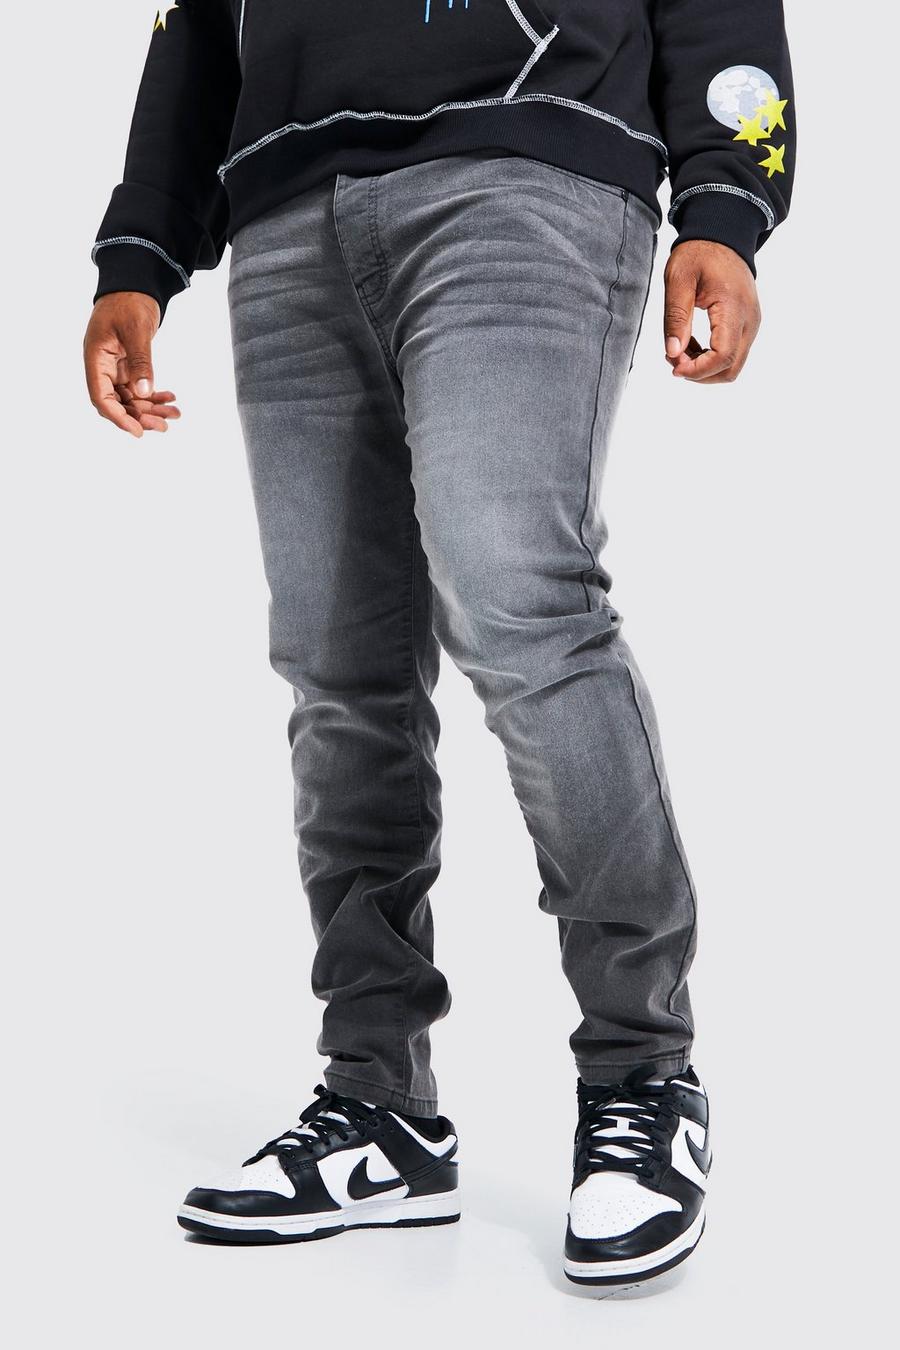 Plus Stretch Skinny Jeans, Charcoal gris